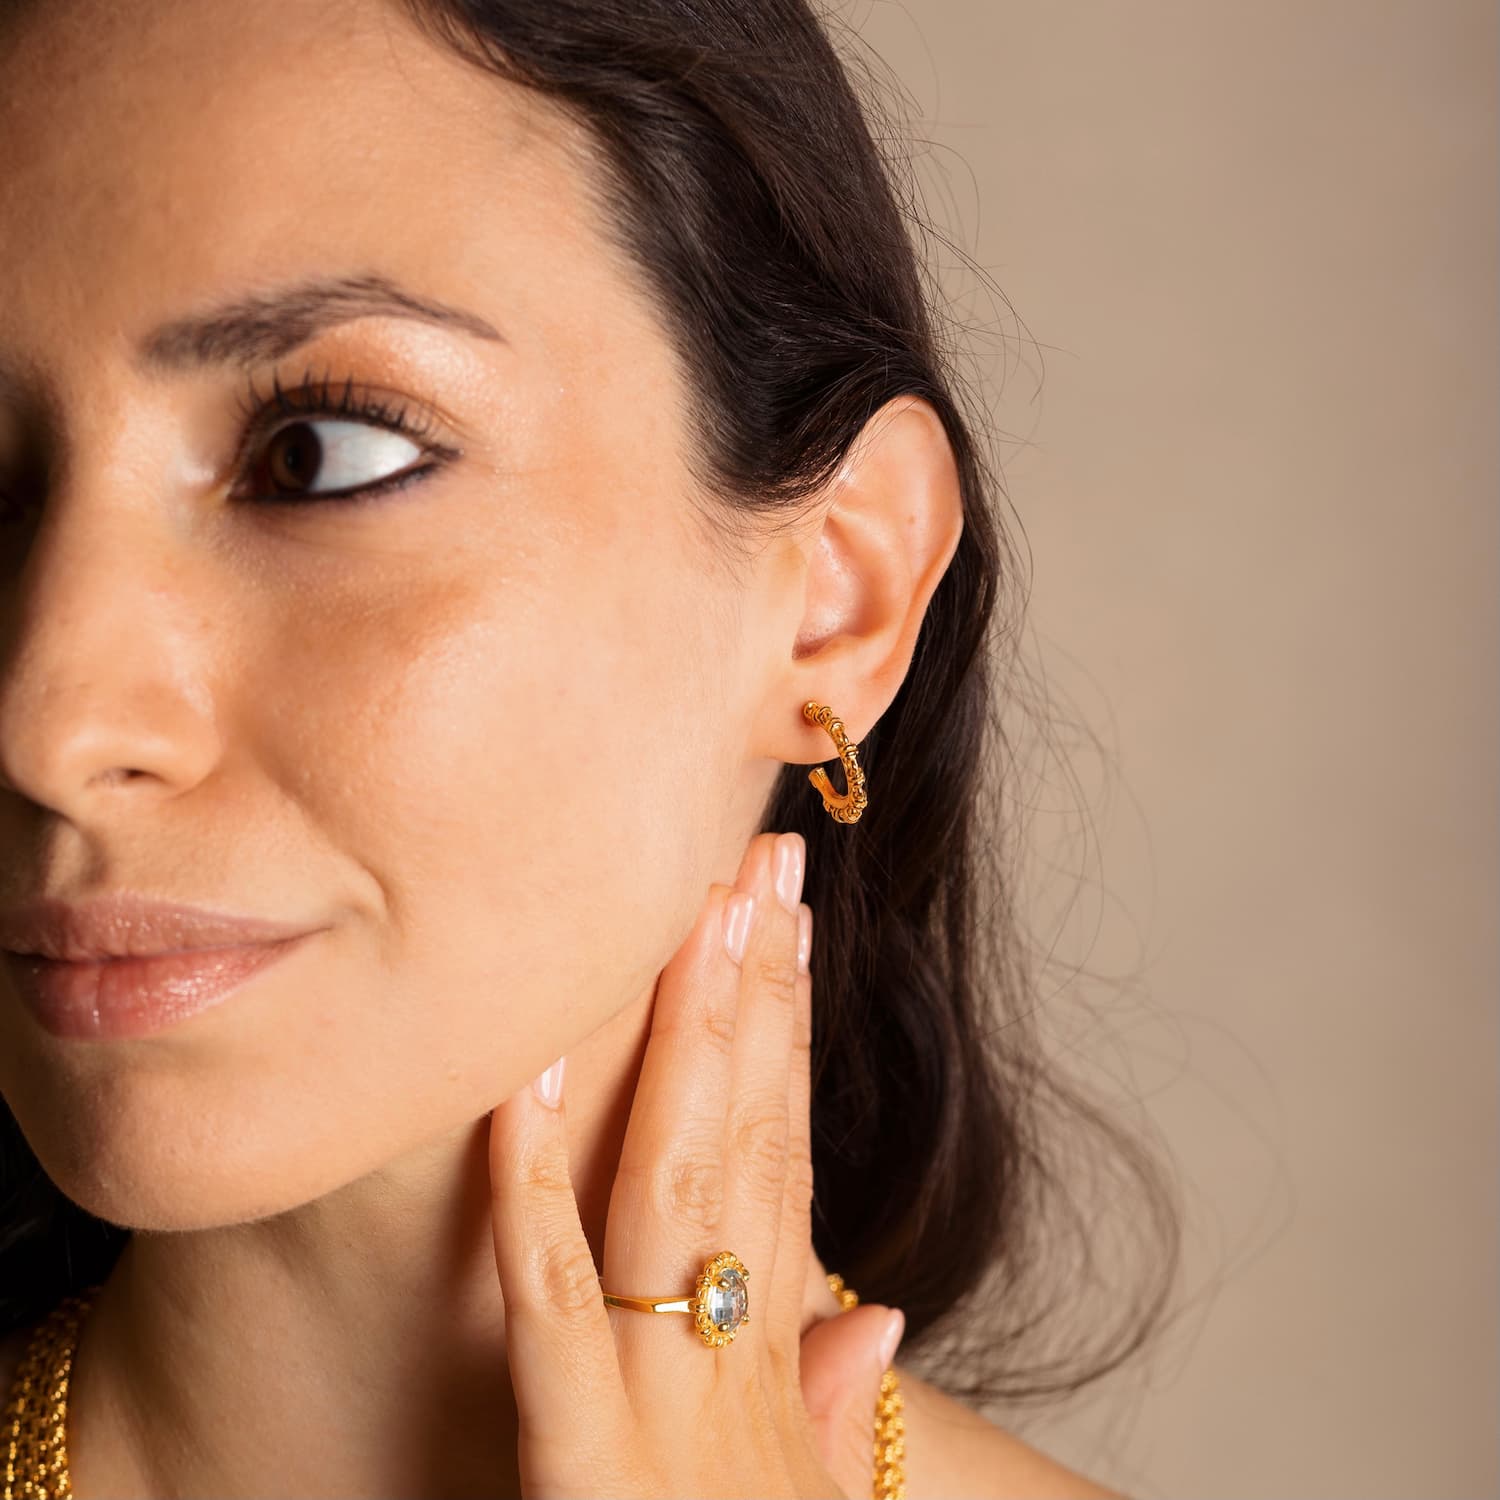 A model wearing four gold chains with matching gold hoop earrings and a gold ring in the same iconic chain design around a semi-precious gemstone. All hand-crafted Italian jewelry is made by DelBrenna Italian Jewelers in Tuscany. 